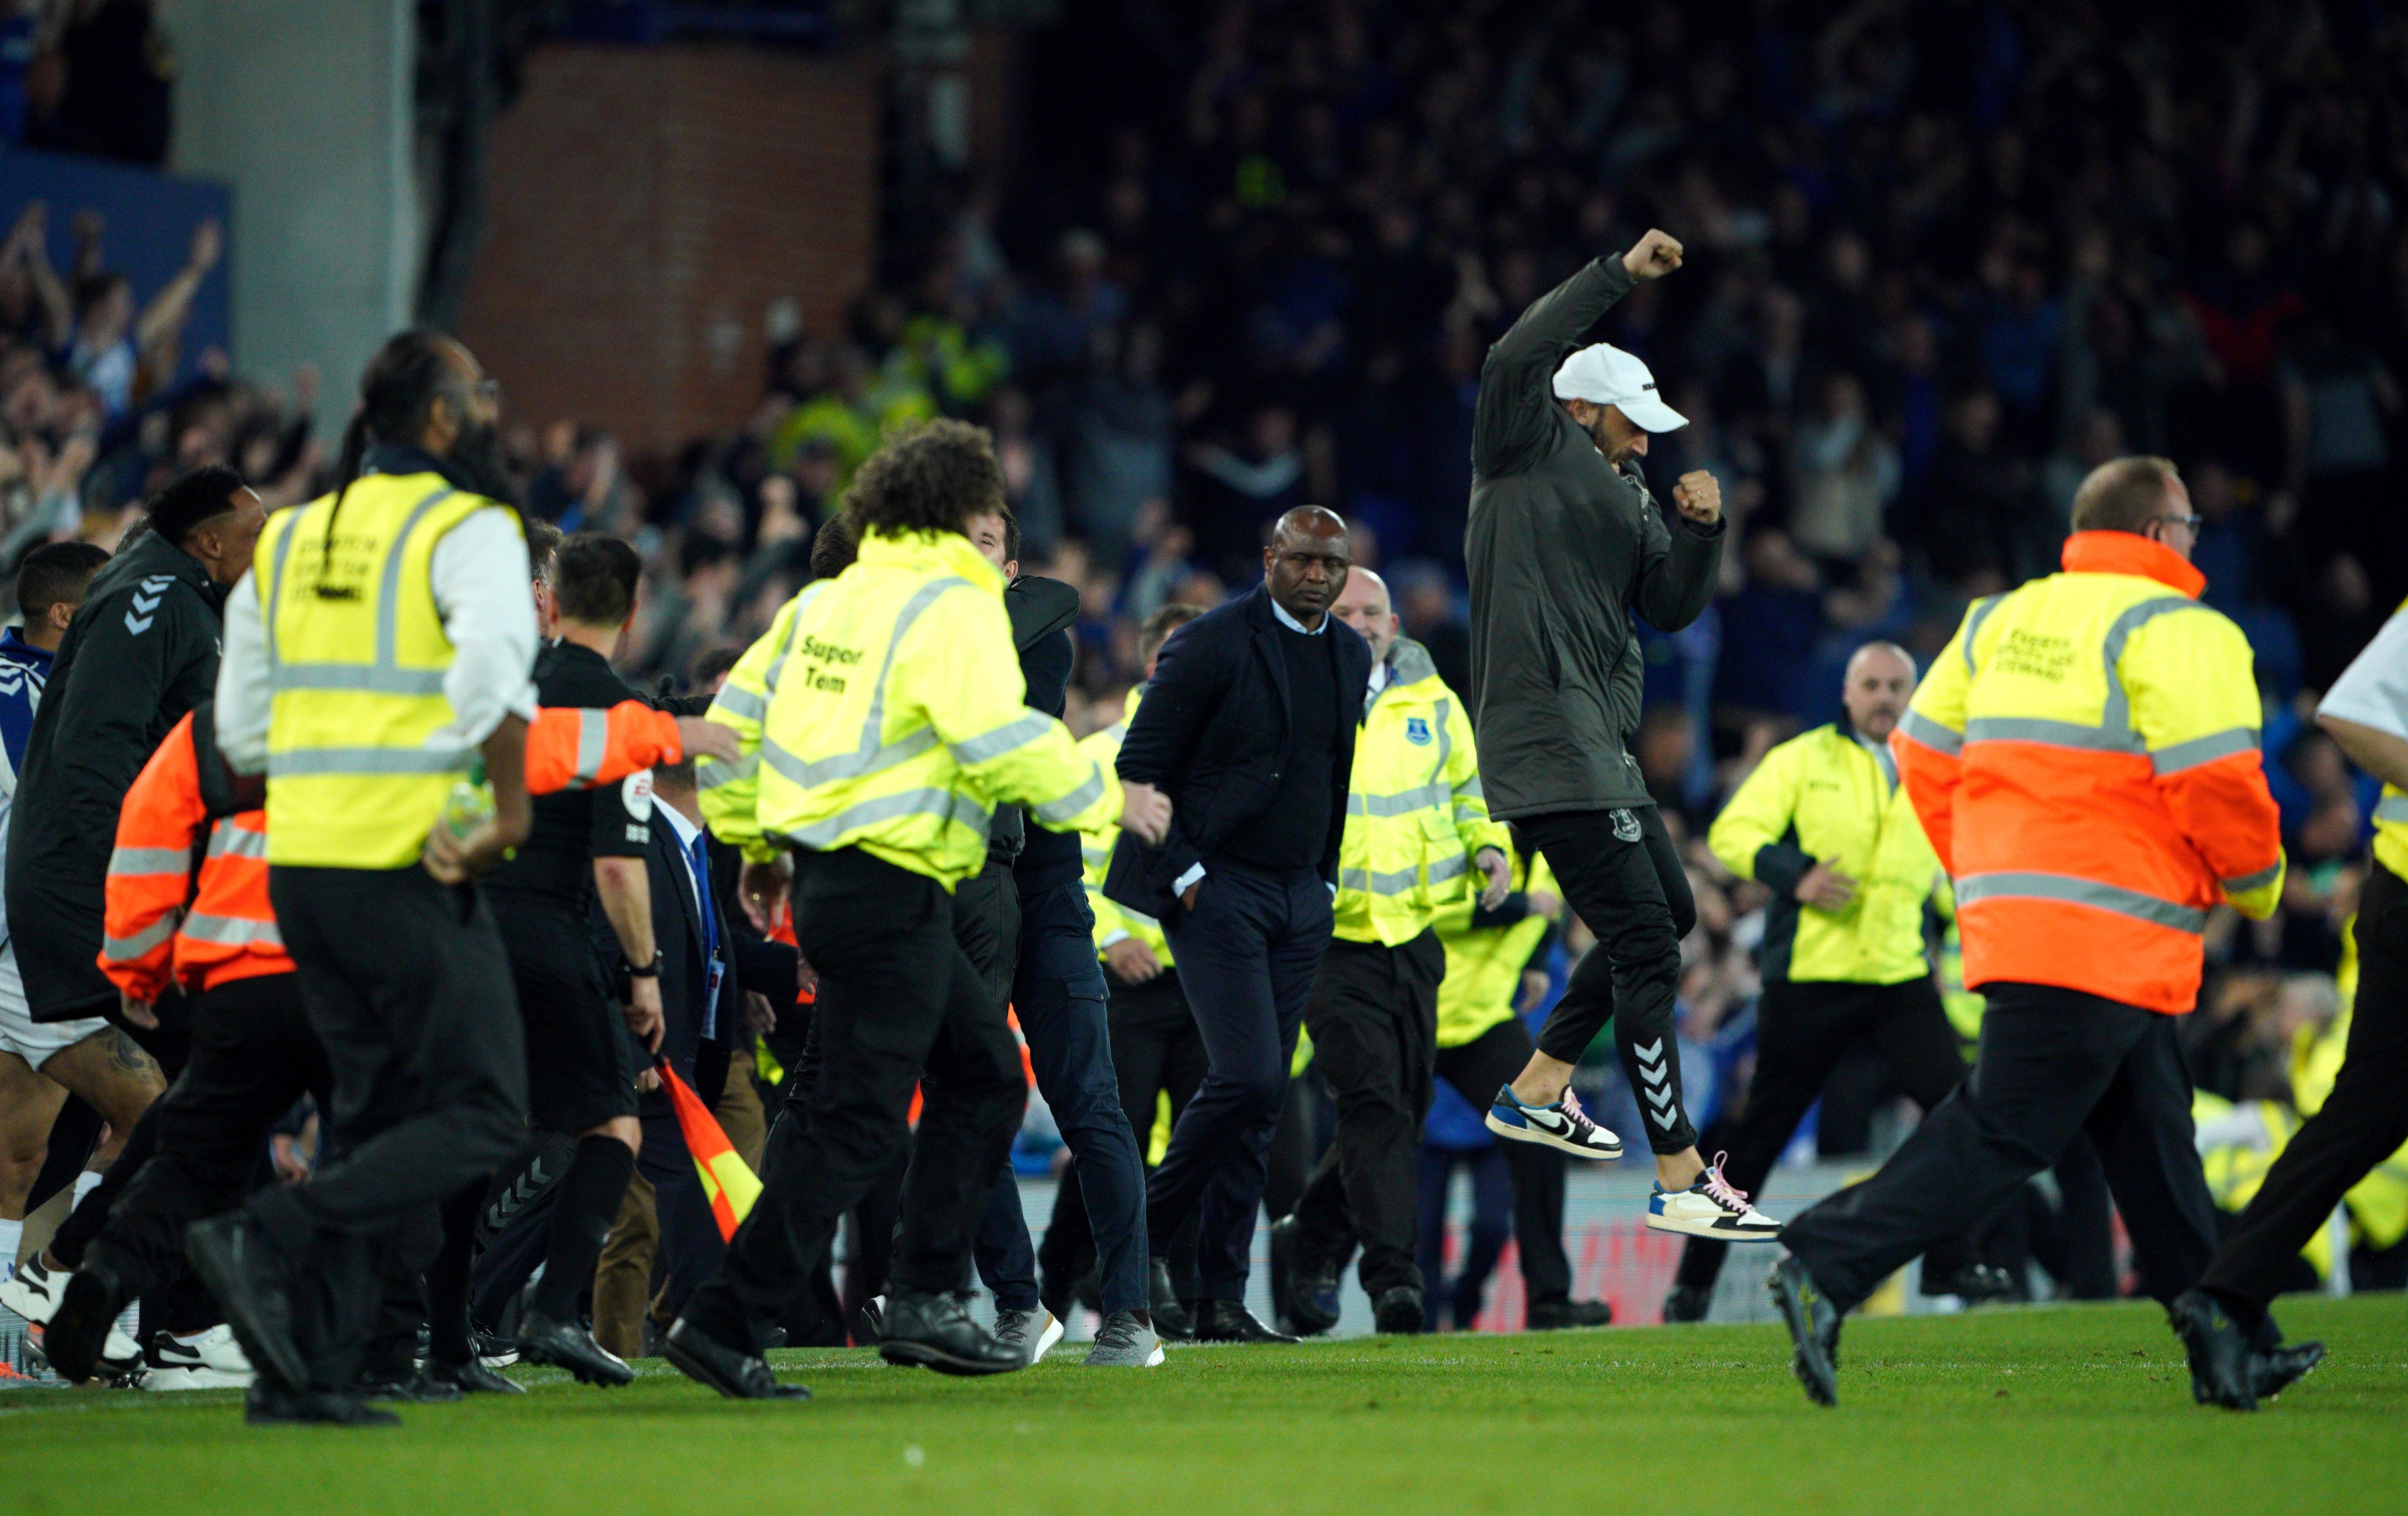 Patrick Vieira will not face any punishment from the FA for his altercation with a fan on the Goodison Park pitch last week (Peter Byrne/PA)